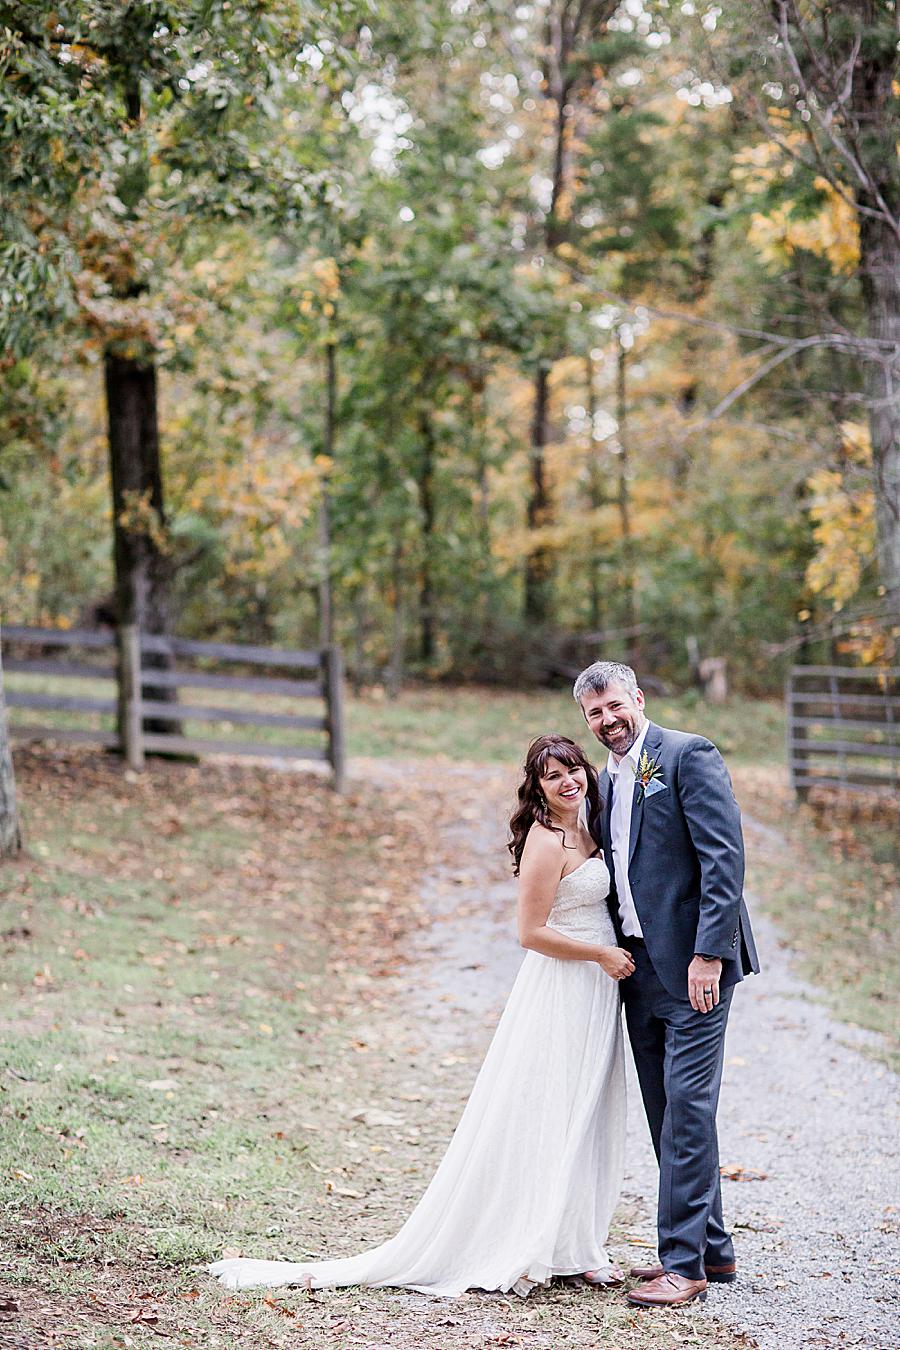 Gravel path at this RiverView Family Farm wedding by Knoxville Wedding Photographer, Amanda May Photos.